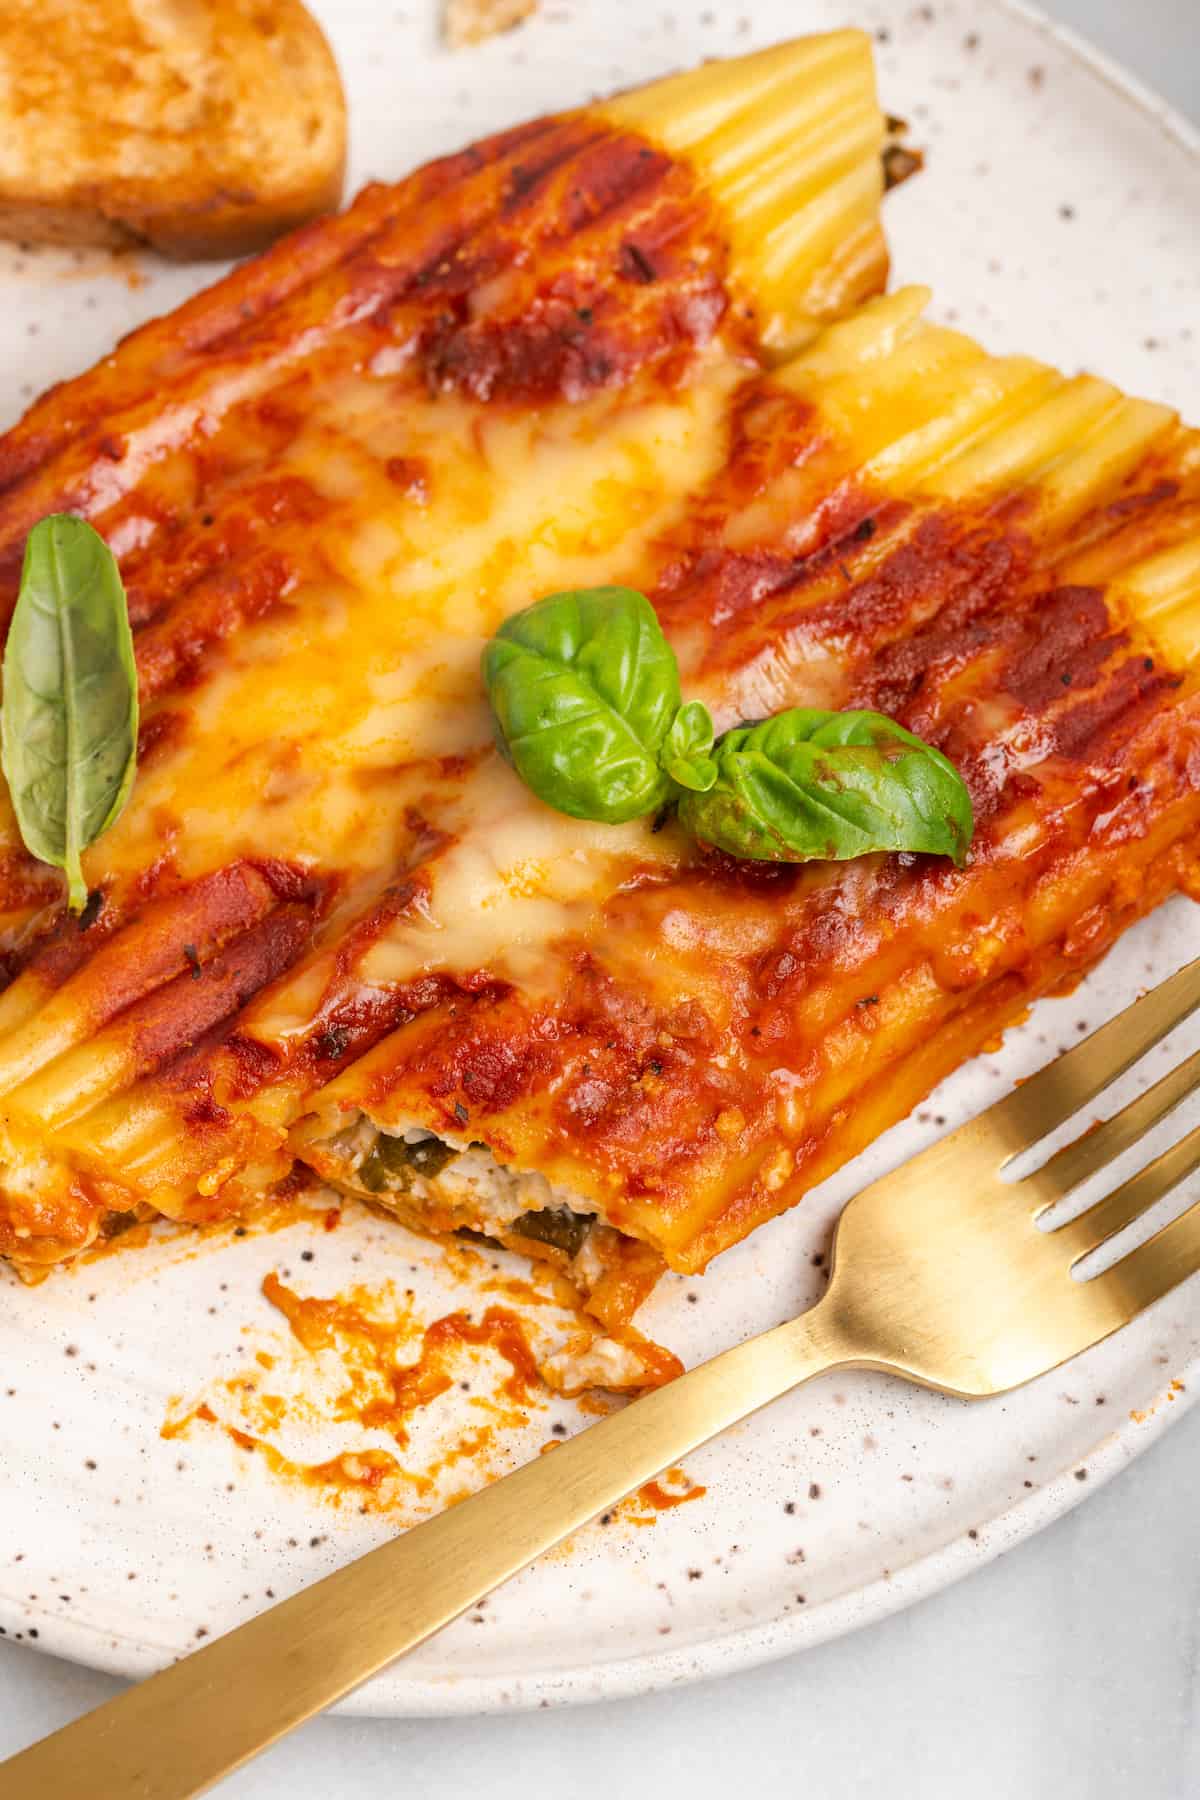 Vegan manicotti on plate with bite removed